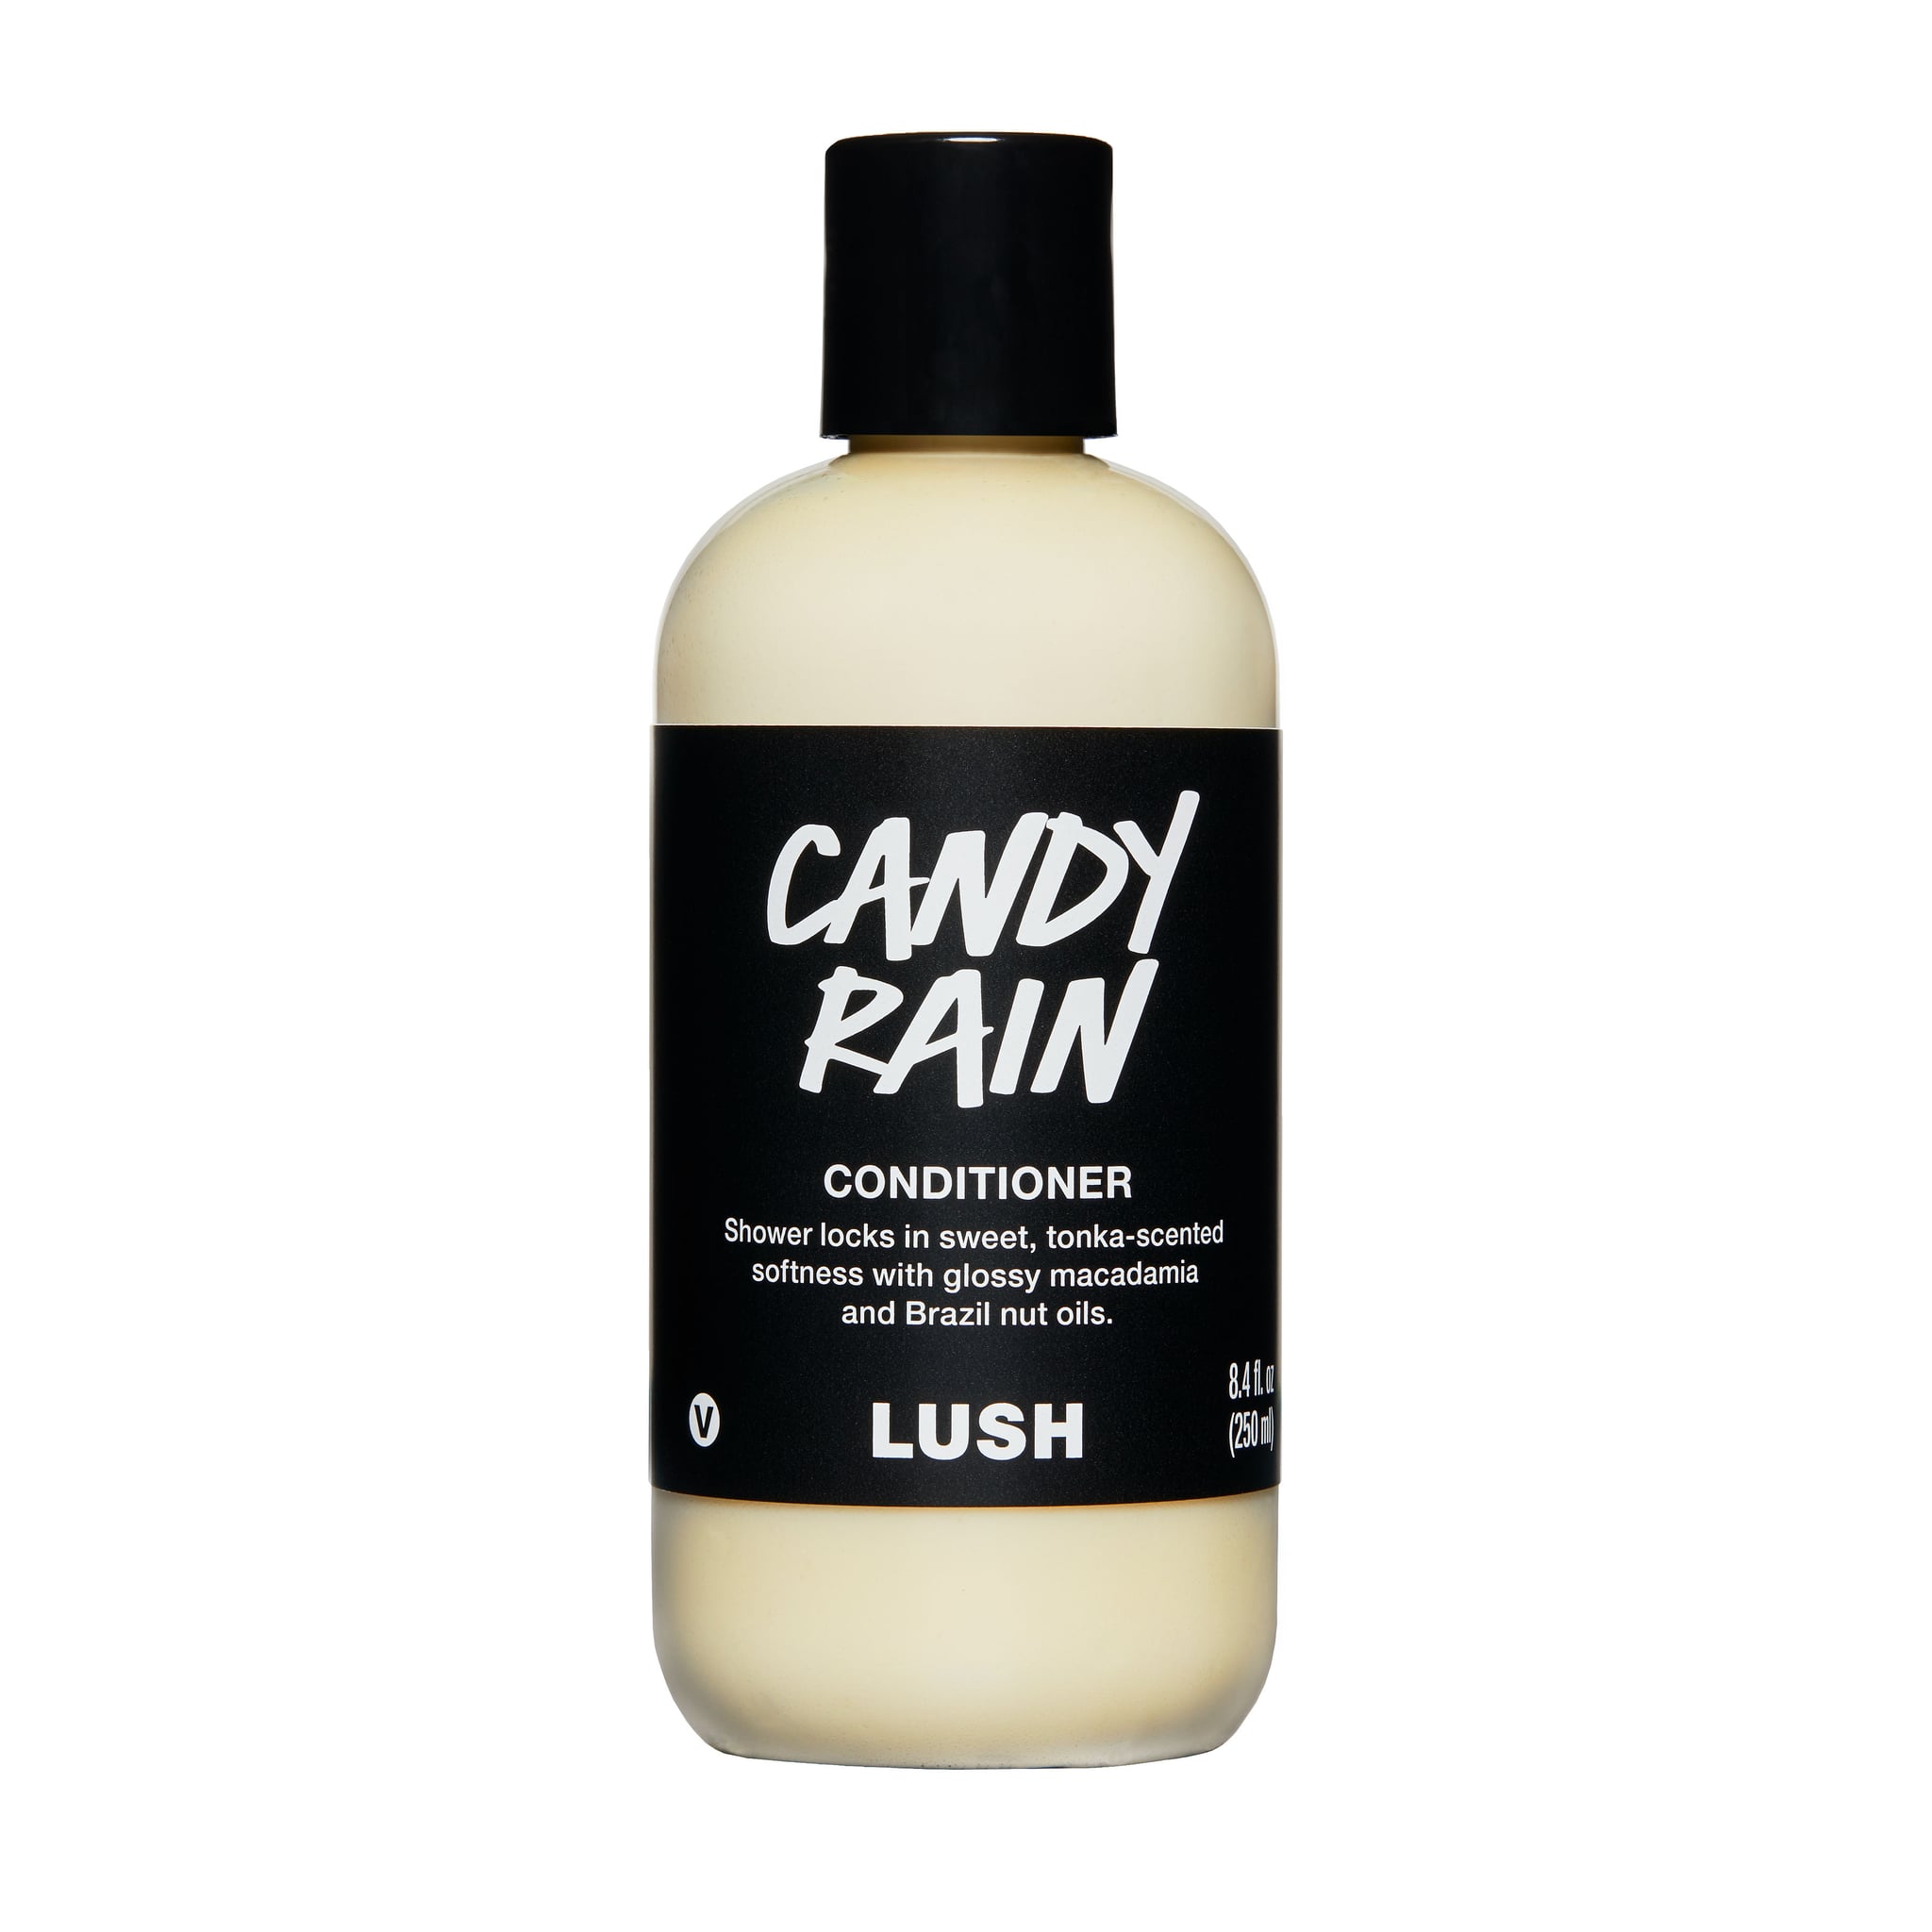 Lush Angel Hair Shampoo and Candy Rain Conditioner Review | POPSUGAR Beauty